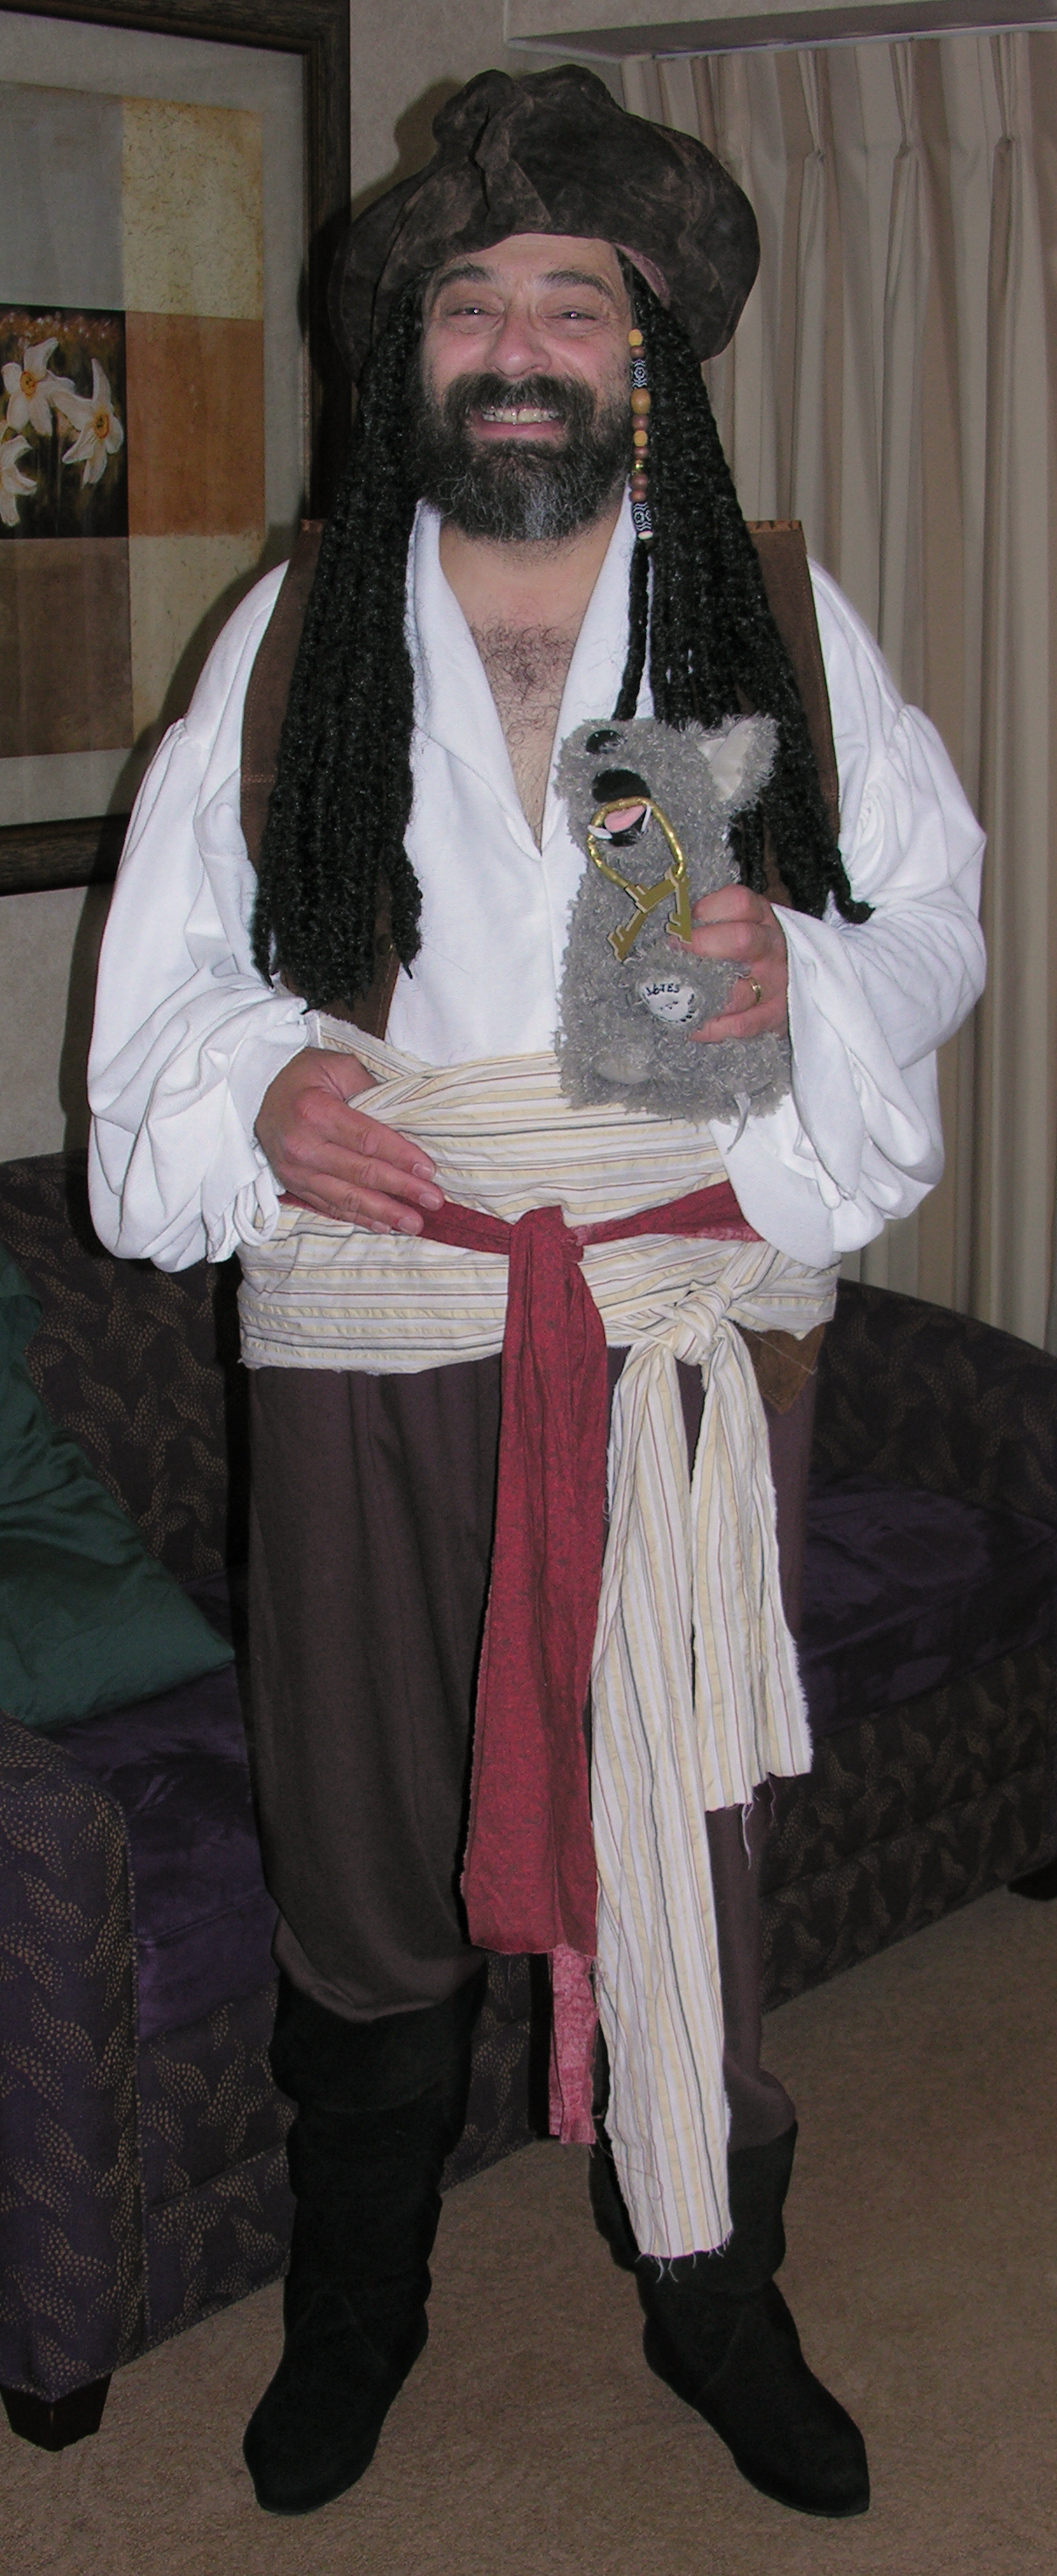 a man dressed in pirate clothing, holding a stuffed animal